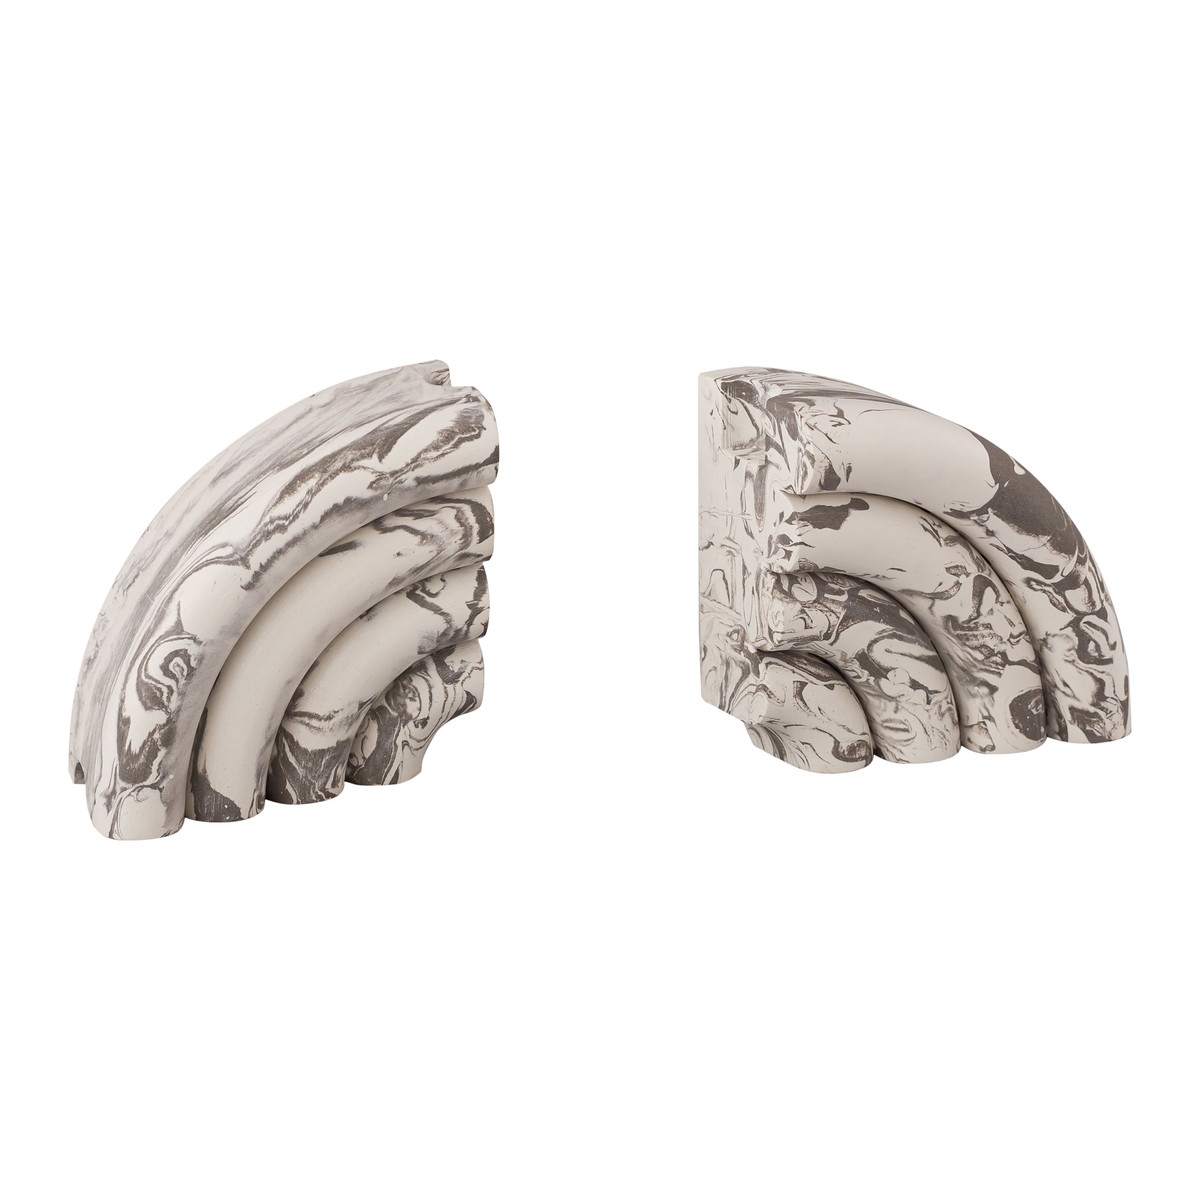 Grey Marble Bookends - Set of 2 - Image 2